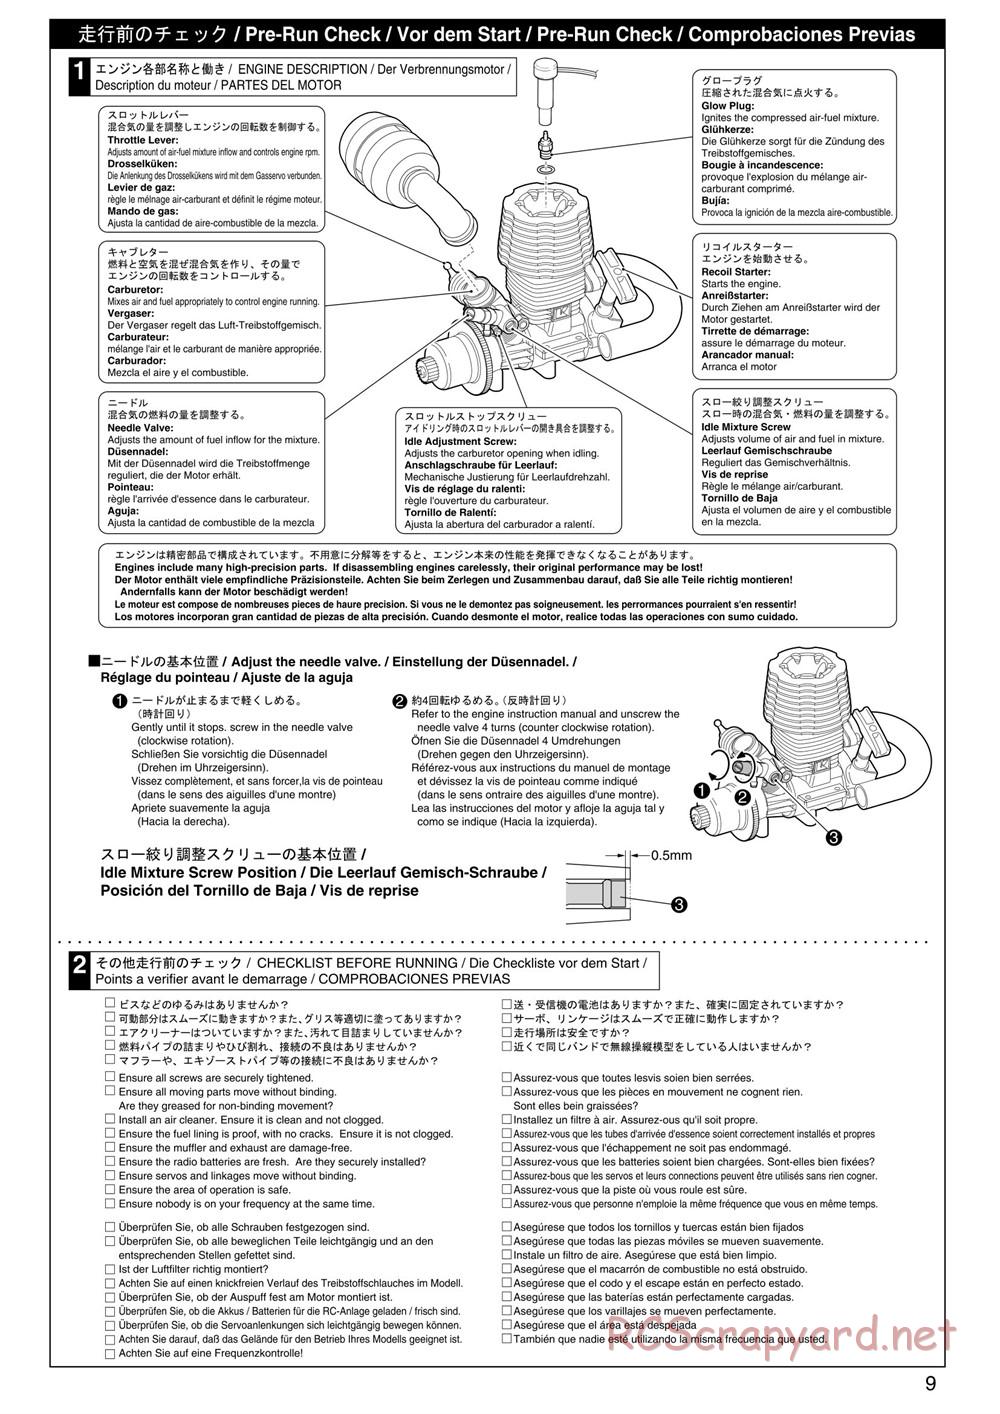 Kyosho - Inferno ST (2005) - Manual - Page 9